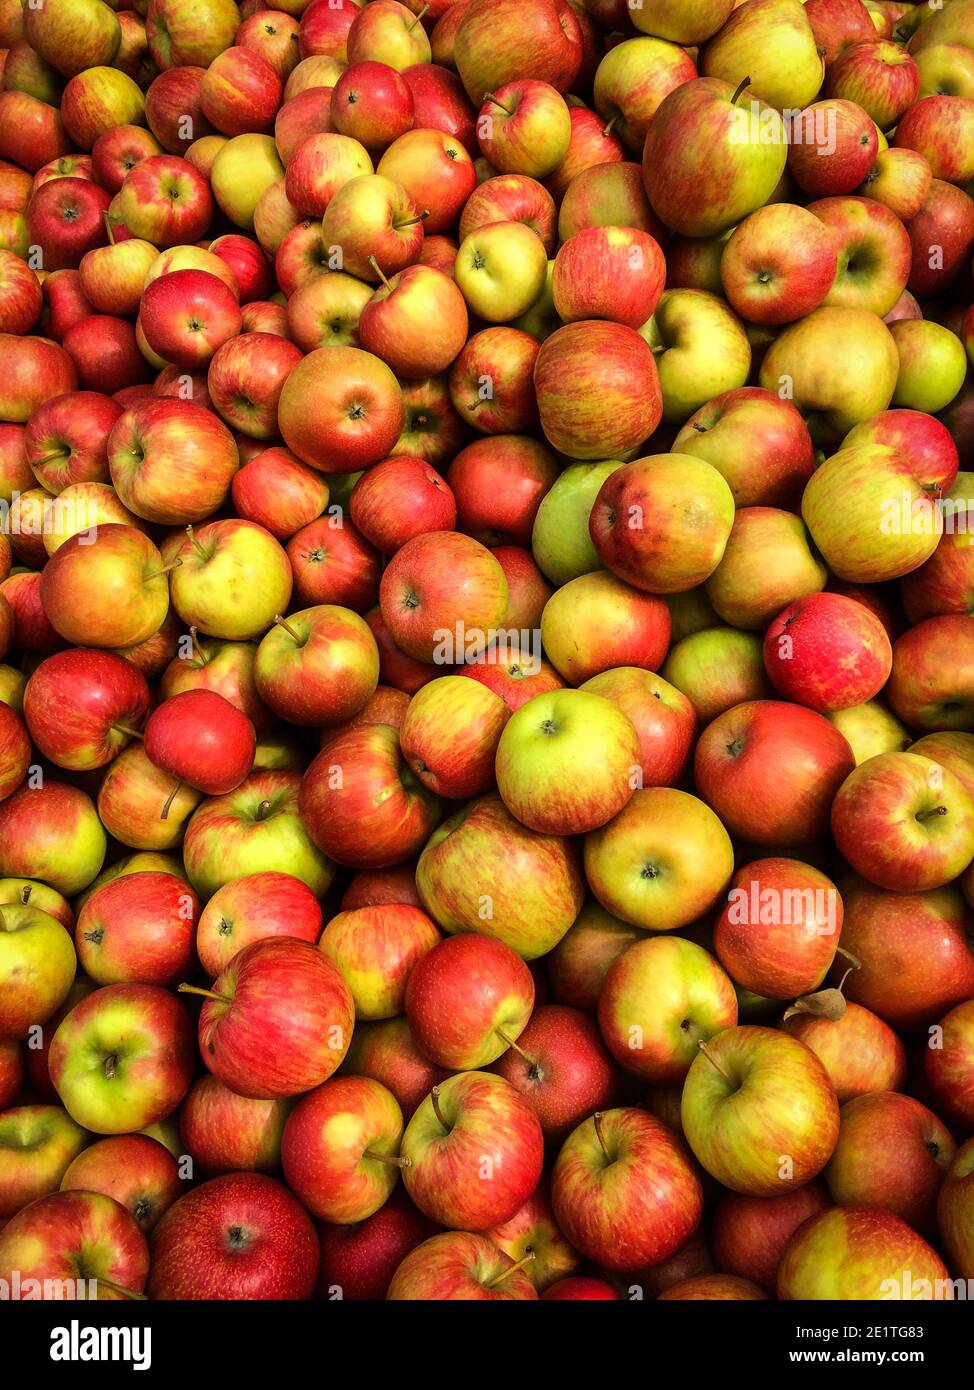 Close up of a stack of apples Stock Photo